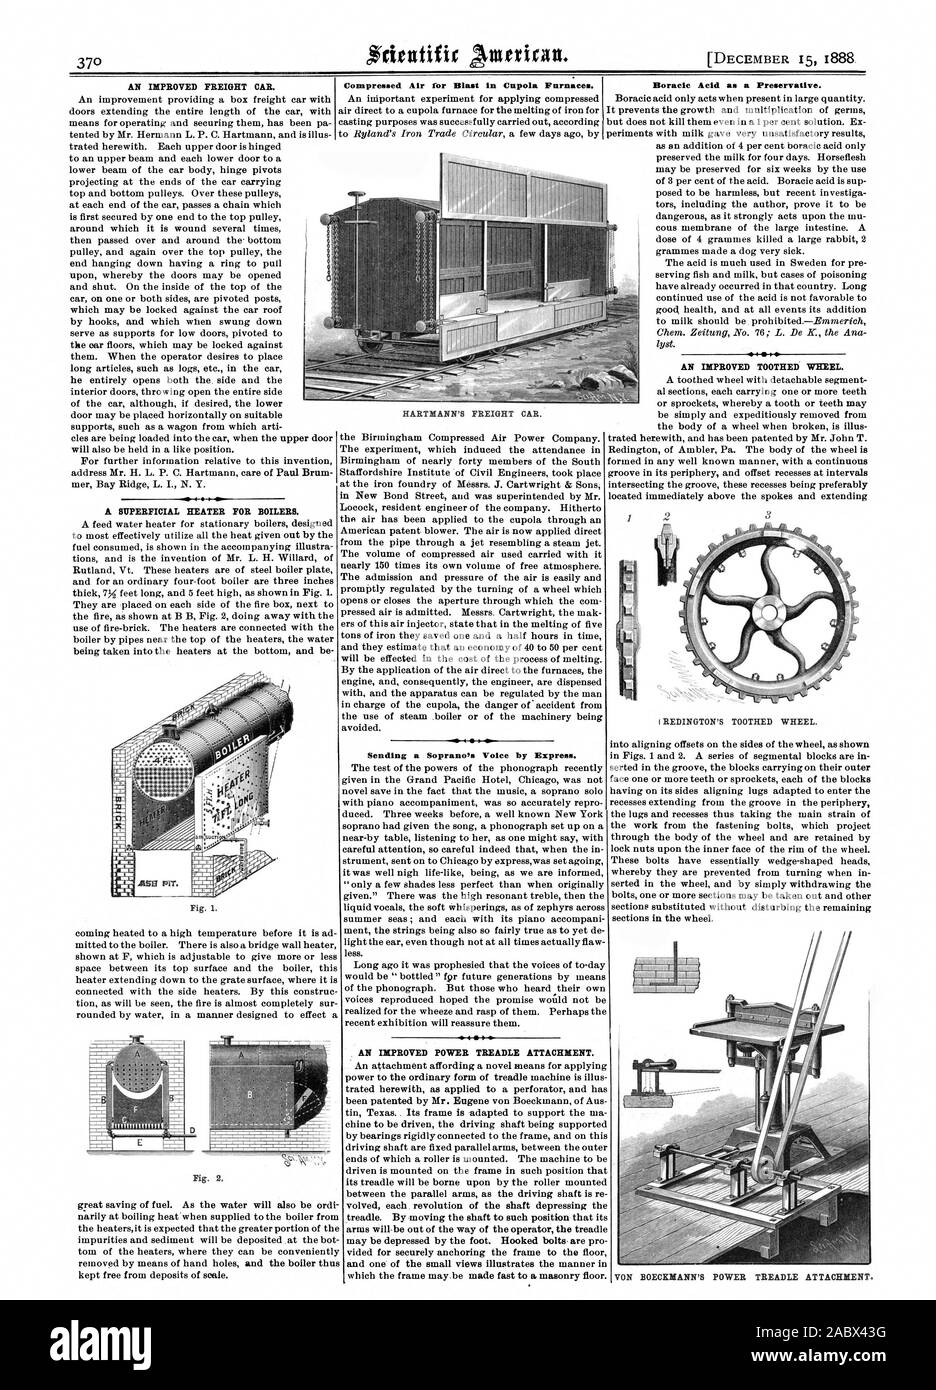 Boracic Acid as a Preservative. AN IMPROVED FREIGHT CAR. Compressed Air for Blast in Cupola Furnaces. Sending a Sopranos. Voice by Express. AN IMPROVED POWER TREADLE ATTACHMENT. AN IMPROVED TOOTHED WHEEL. HARTMANN'S FREIGHT CAR. REDINGTON'S TOOTHED WHEEL., scientific american, 1888-12-15 Stock Photo